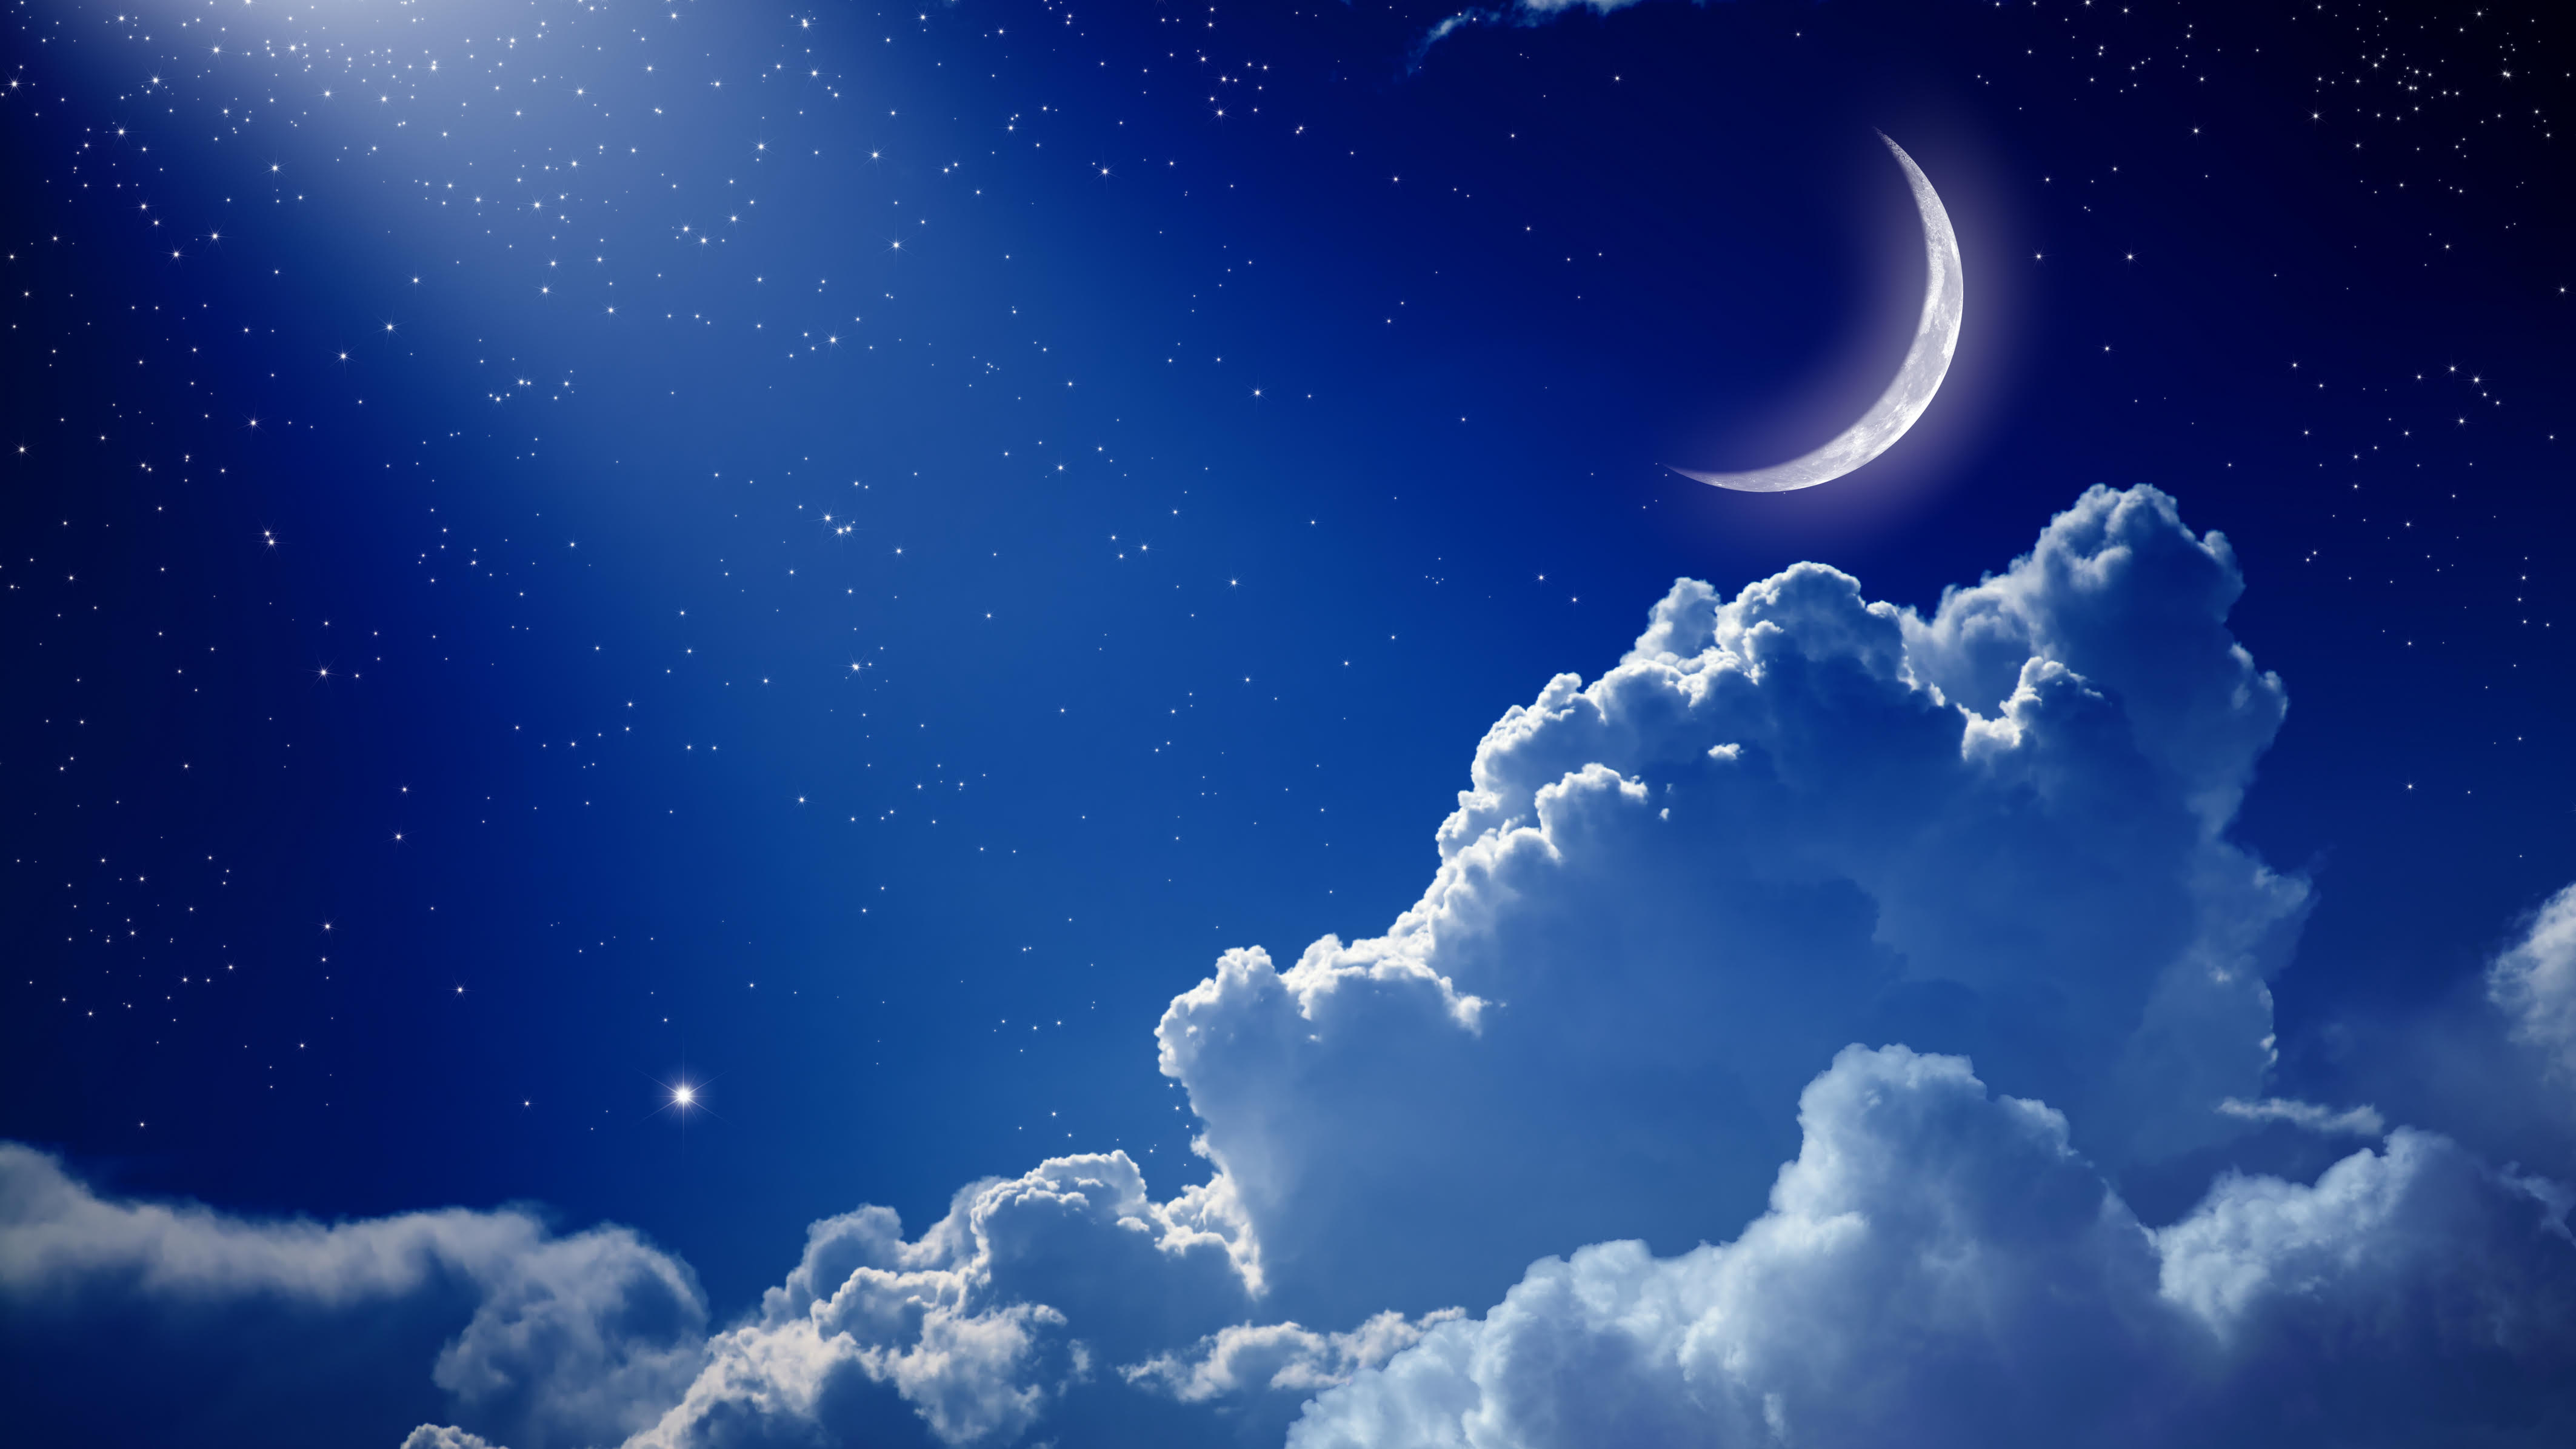 Peaceful background, blue night sky with moon